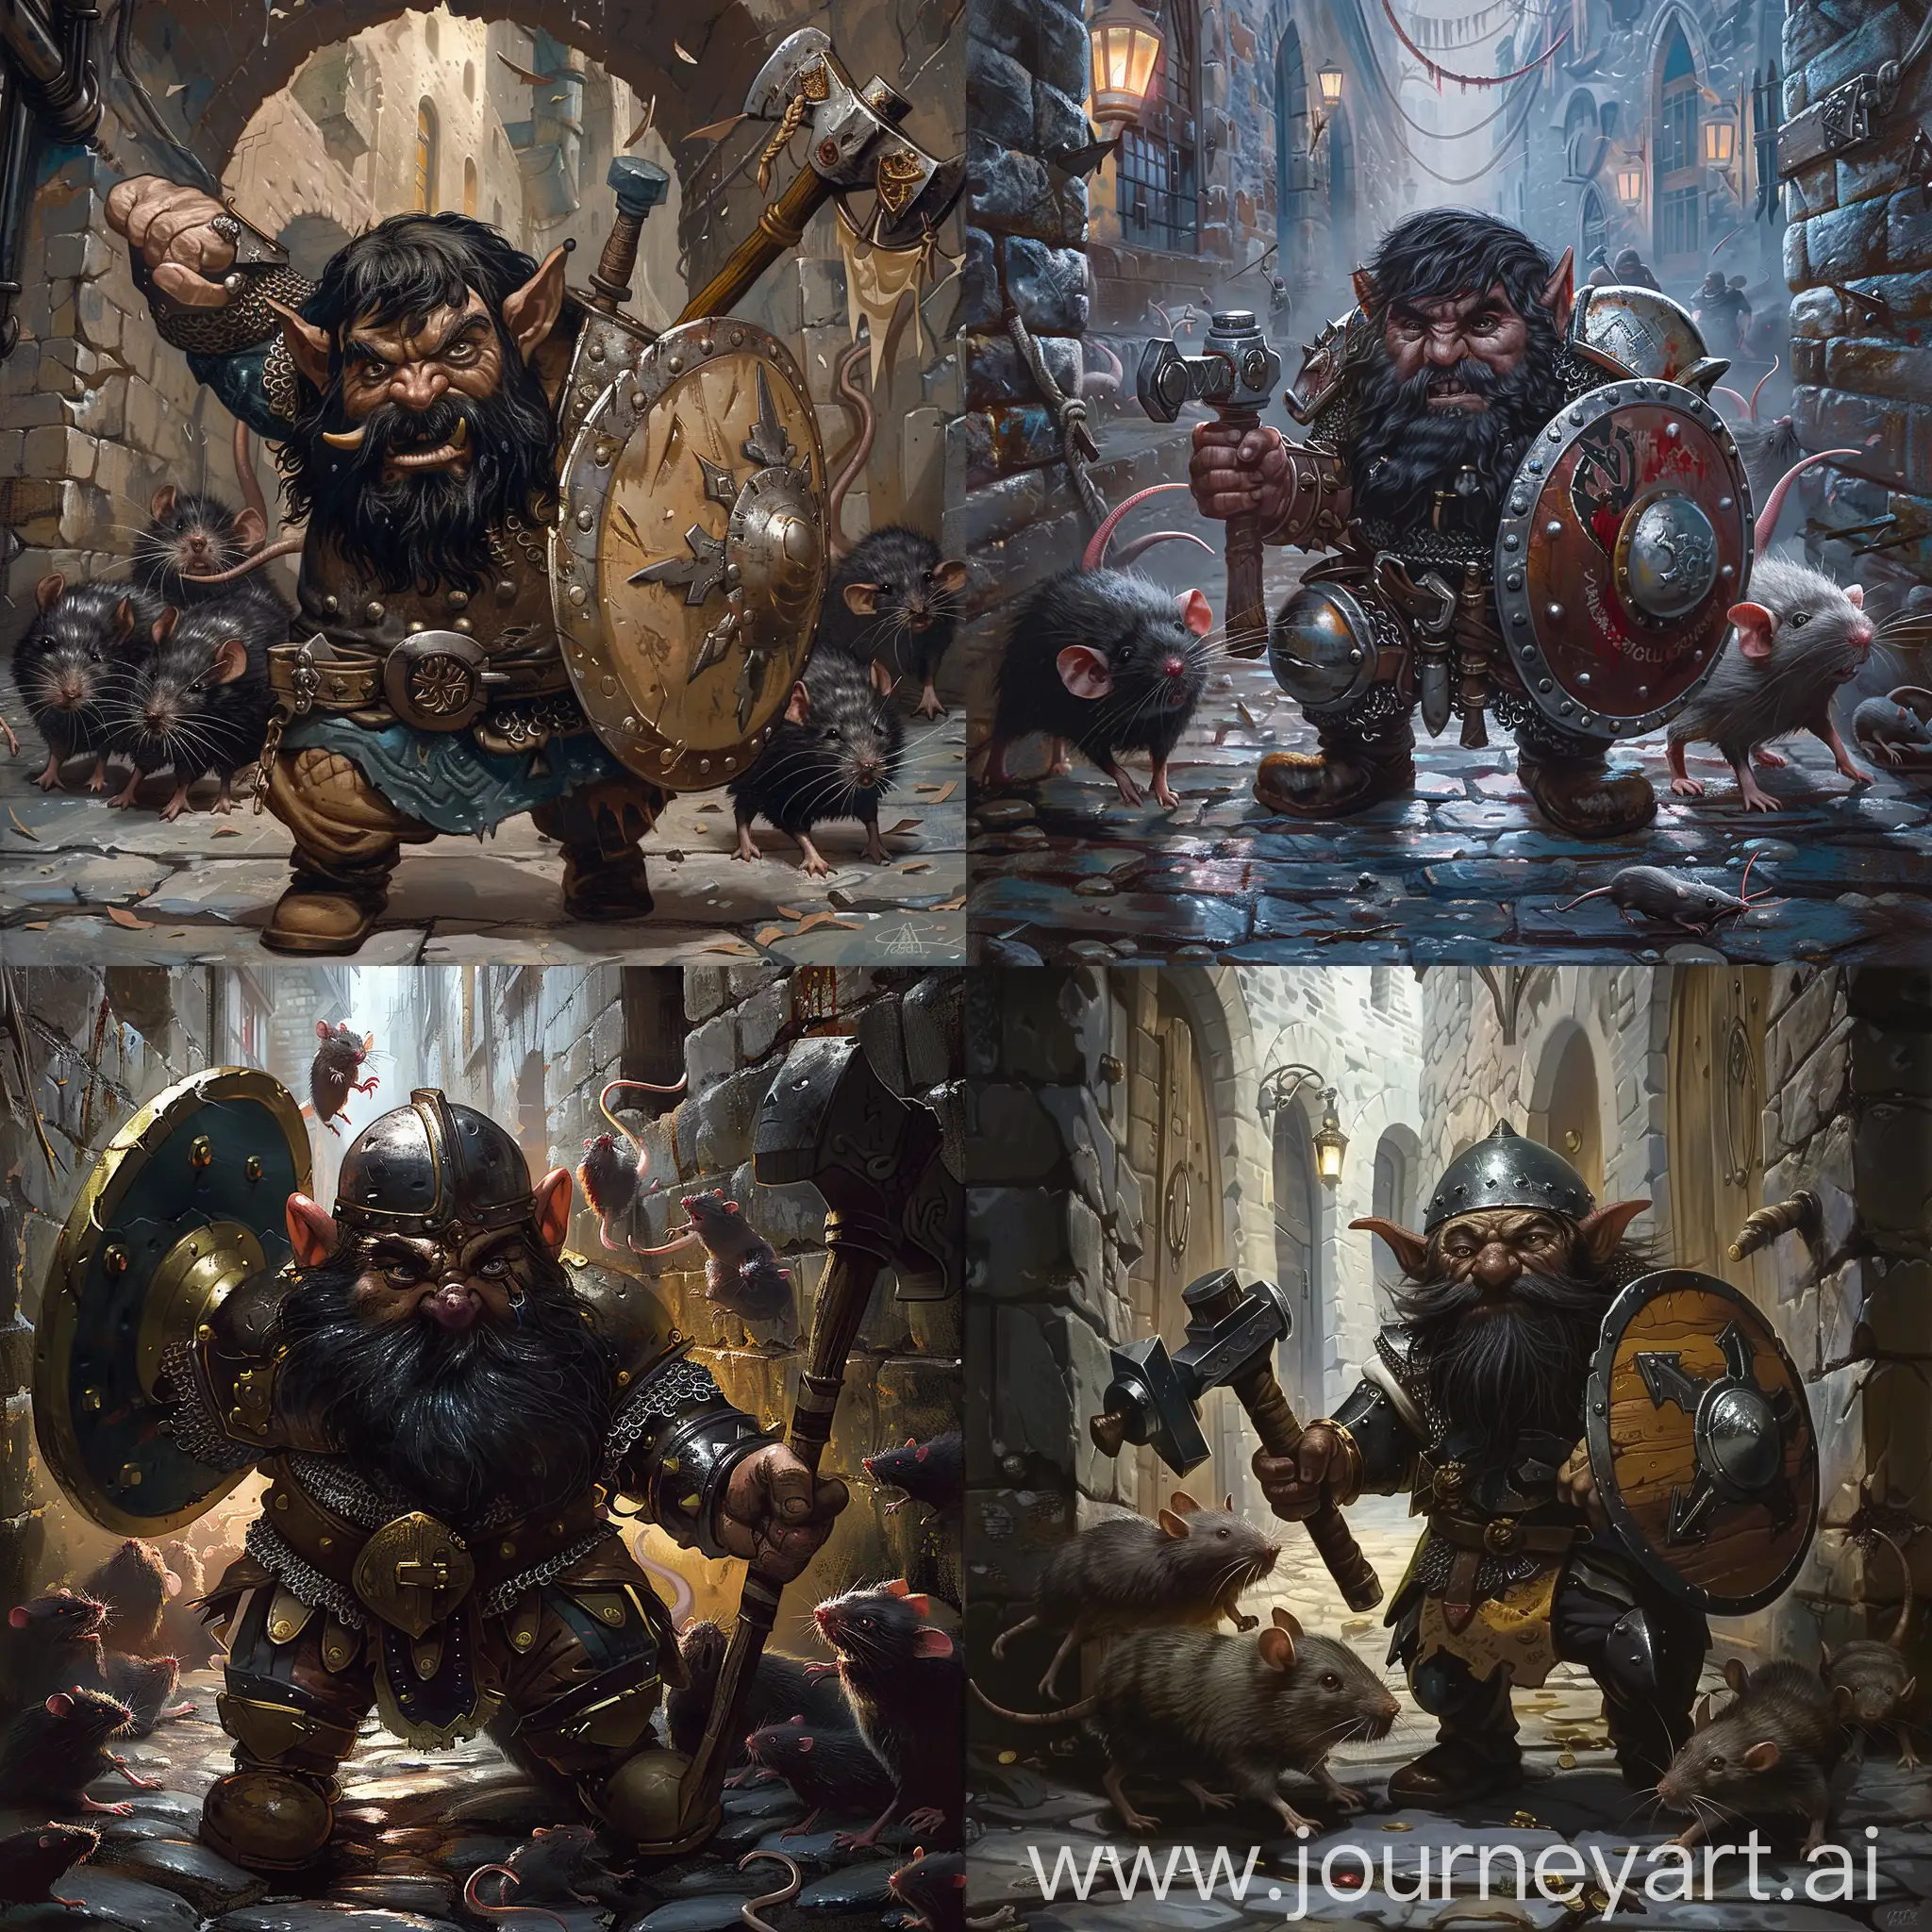 Fearful-Dwarf-Warrior-Defends-Against-Rats-in-Sewer-Dungeon